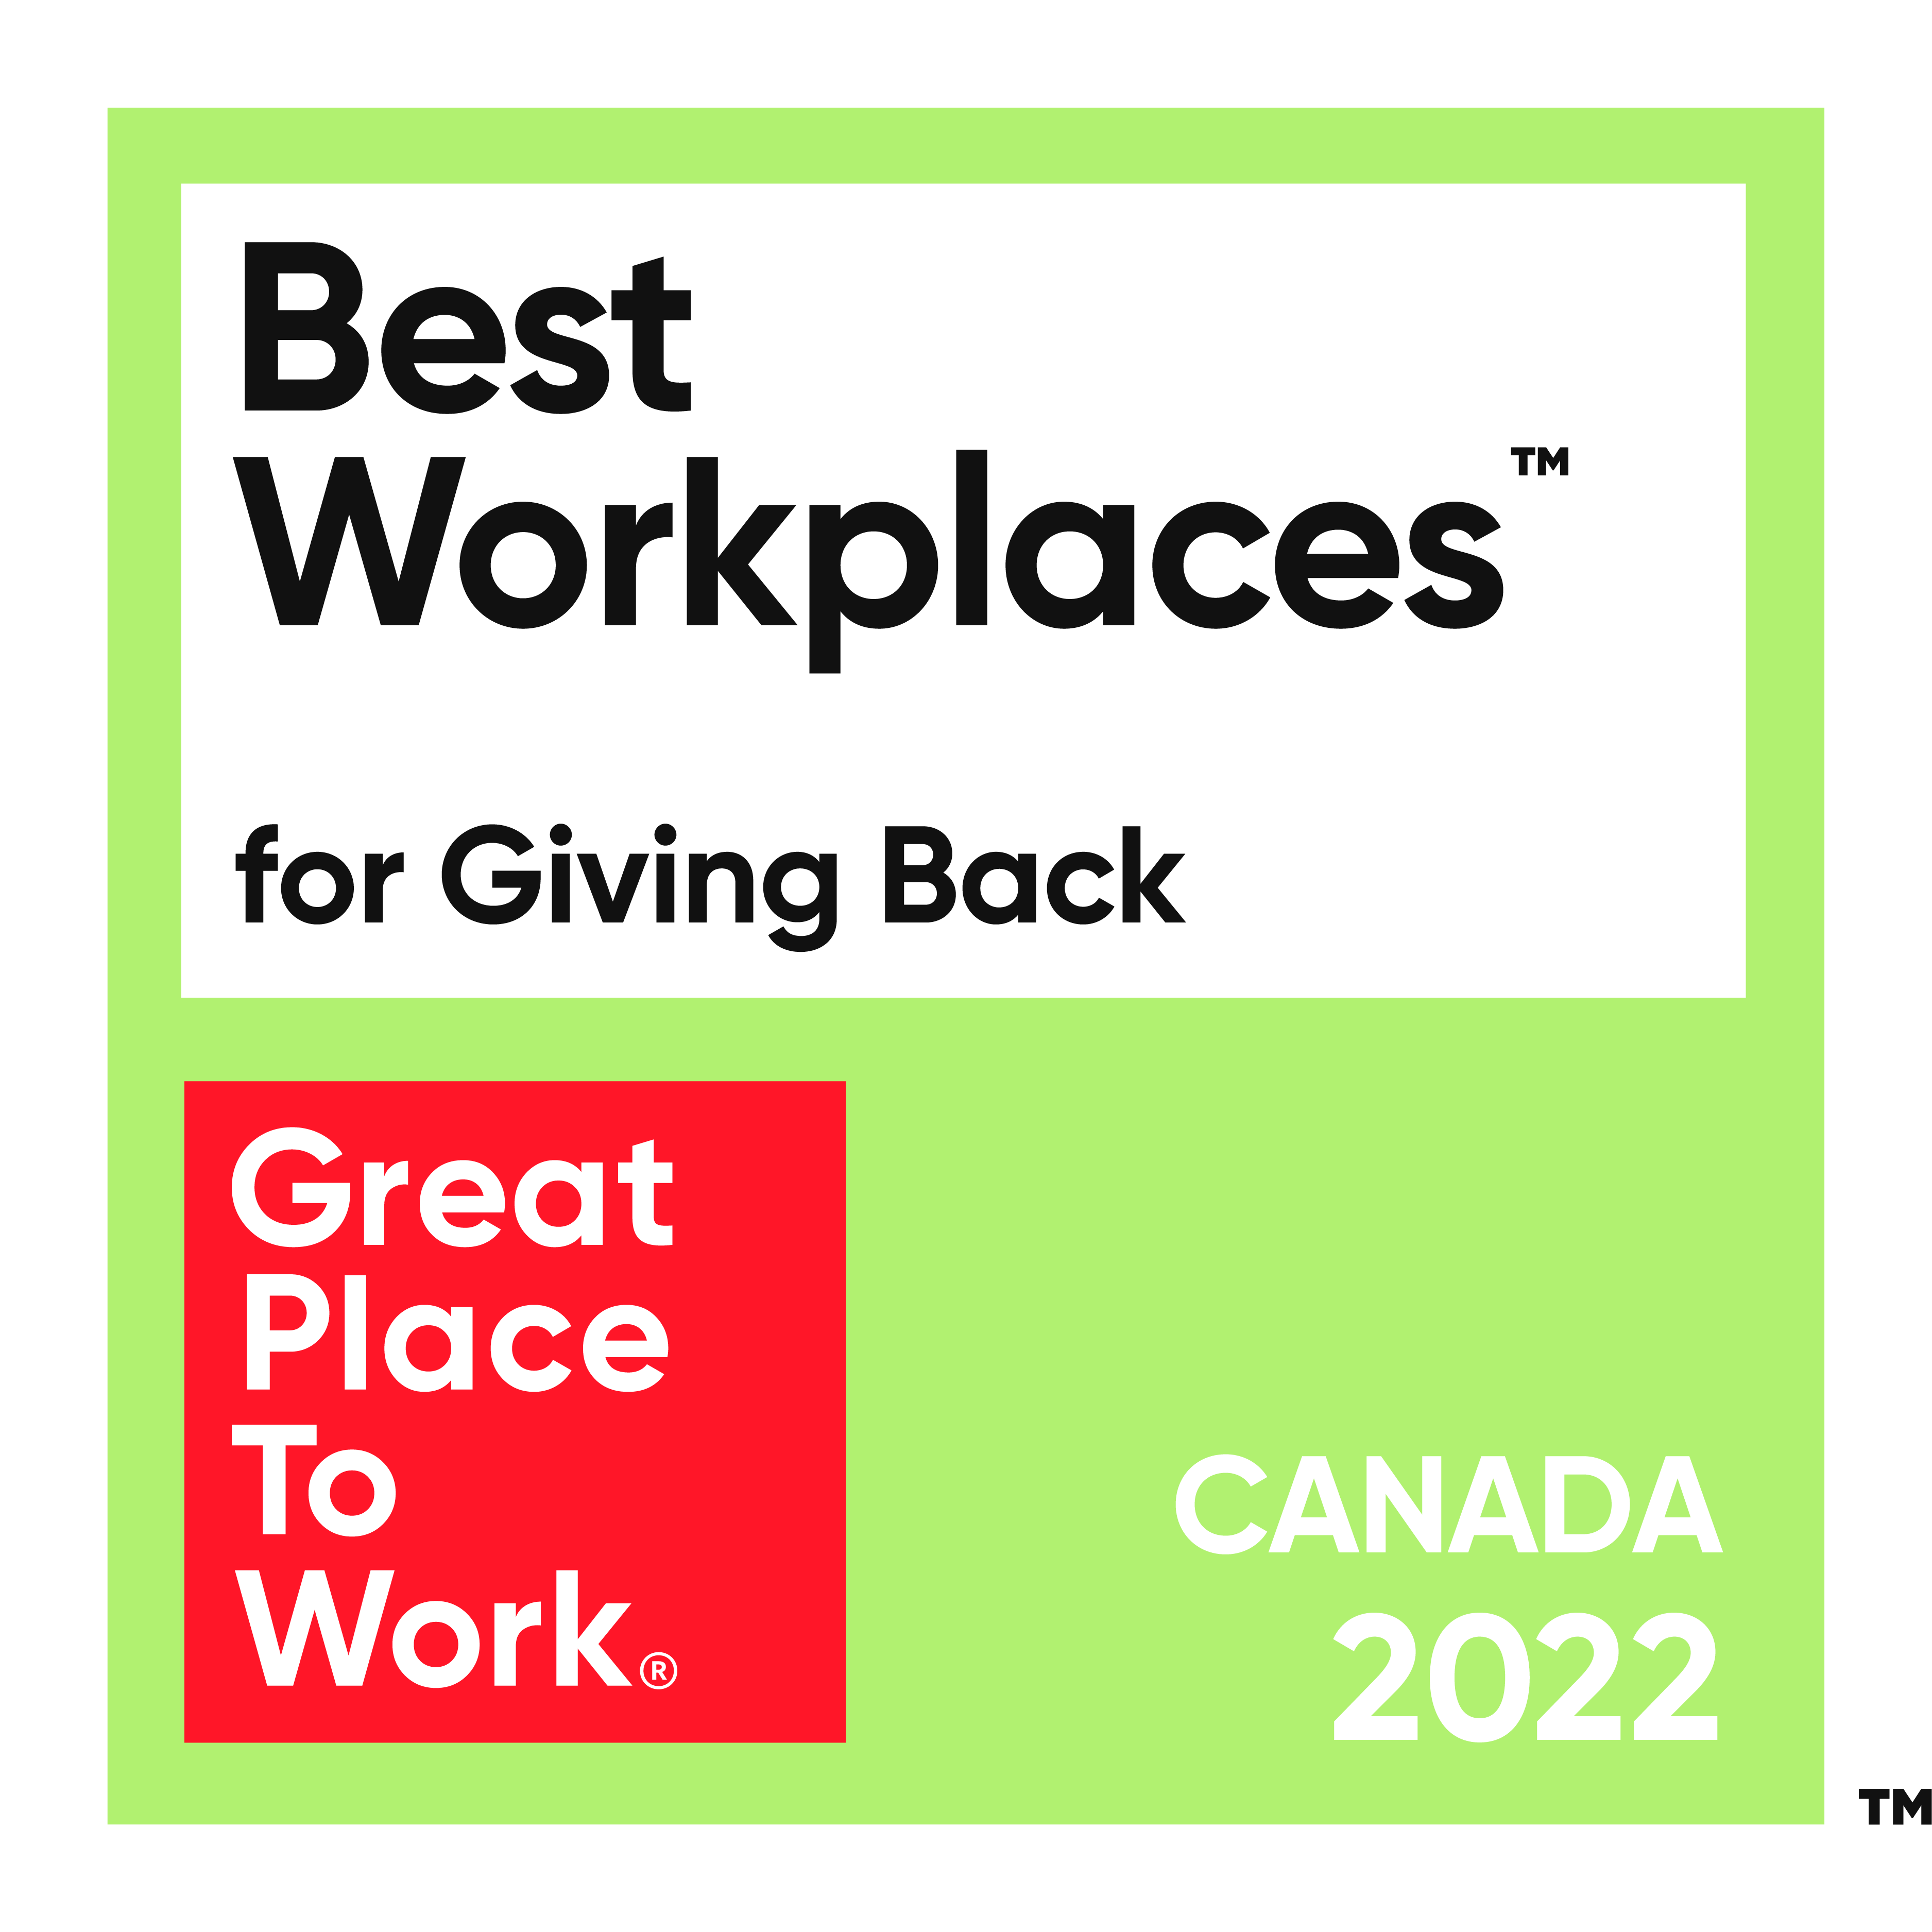 2022_Canada_for Giving Back